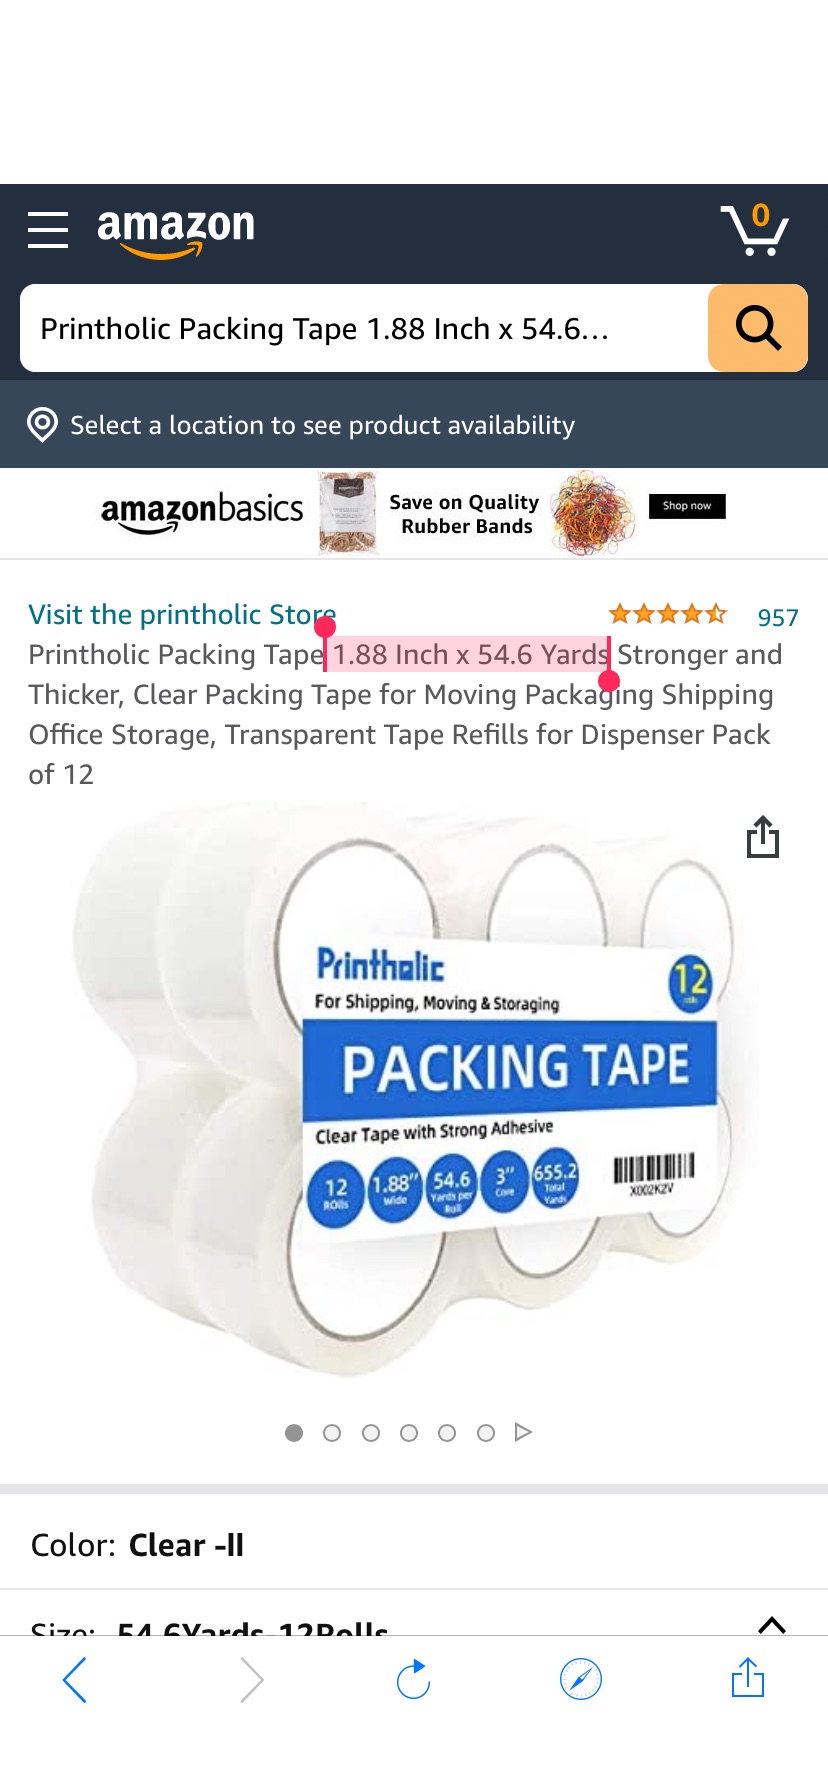 Printholic Packing Tape 1.88 Inch x 54.6 Yards Transparent Tape Refills for Dispenser Pack of 12 : Office Products 打包胶带